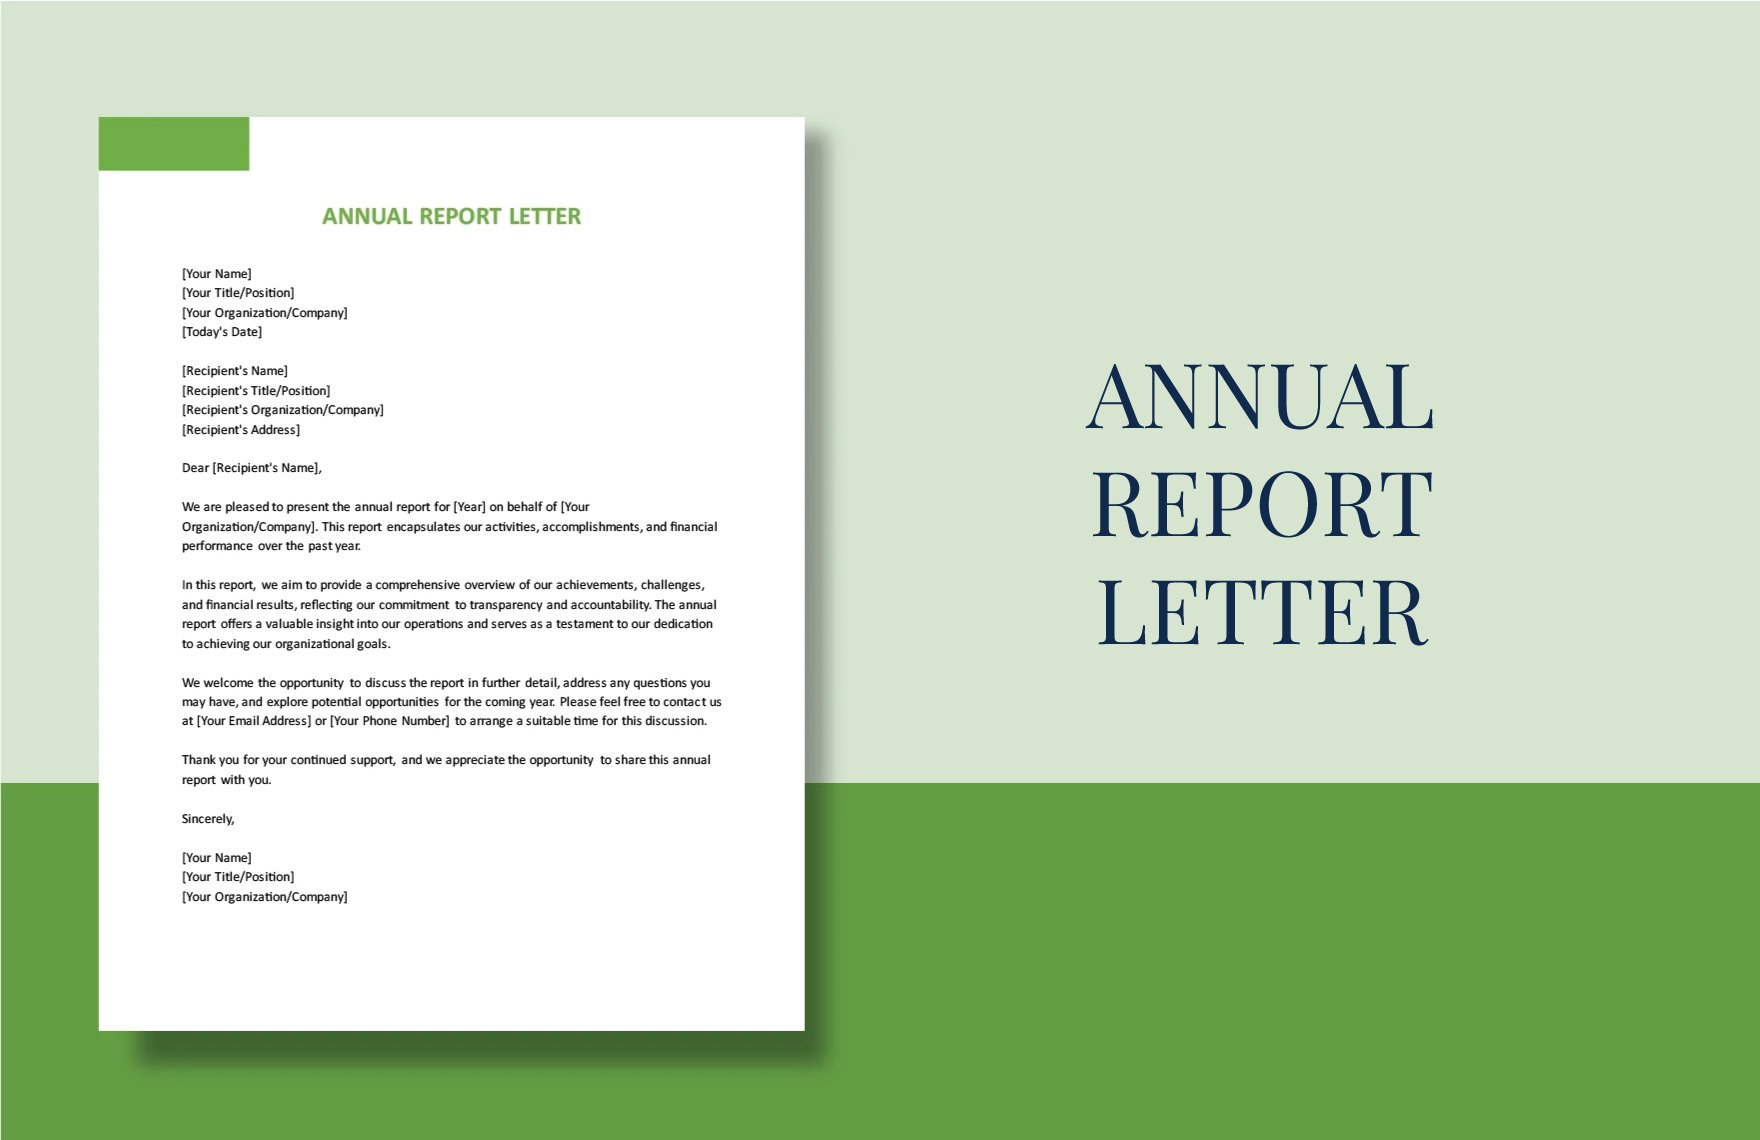 Annual Report Letter